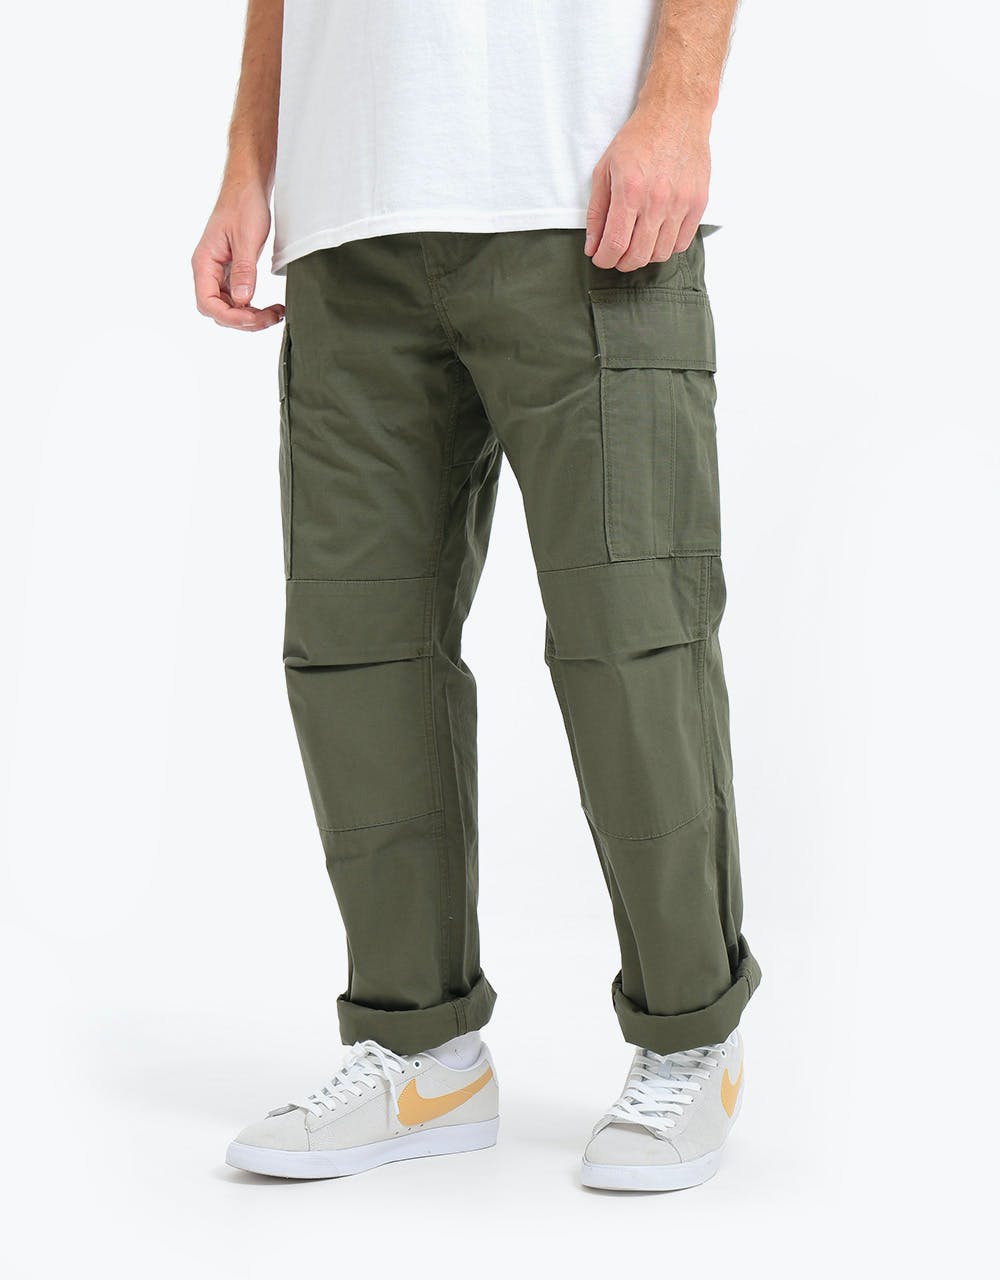 Levi's Skateboarding Cargo Pant - S&E Olive Night Ripstop – Route One